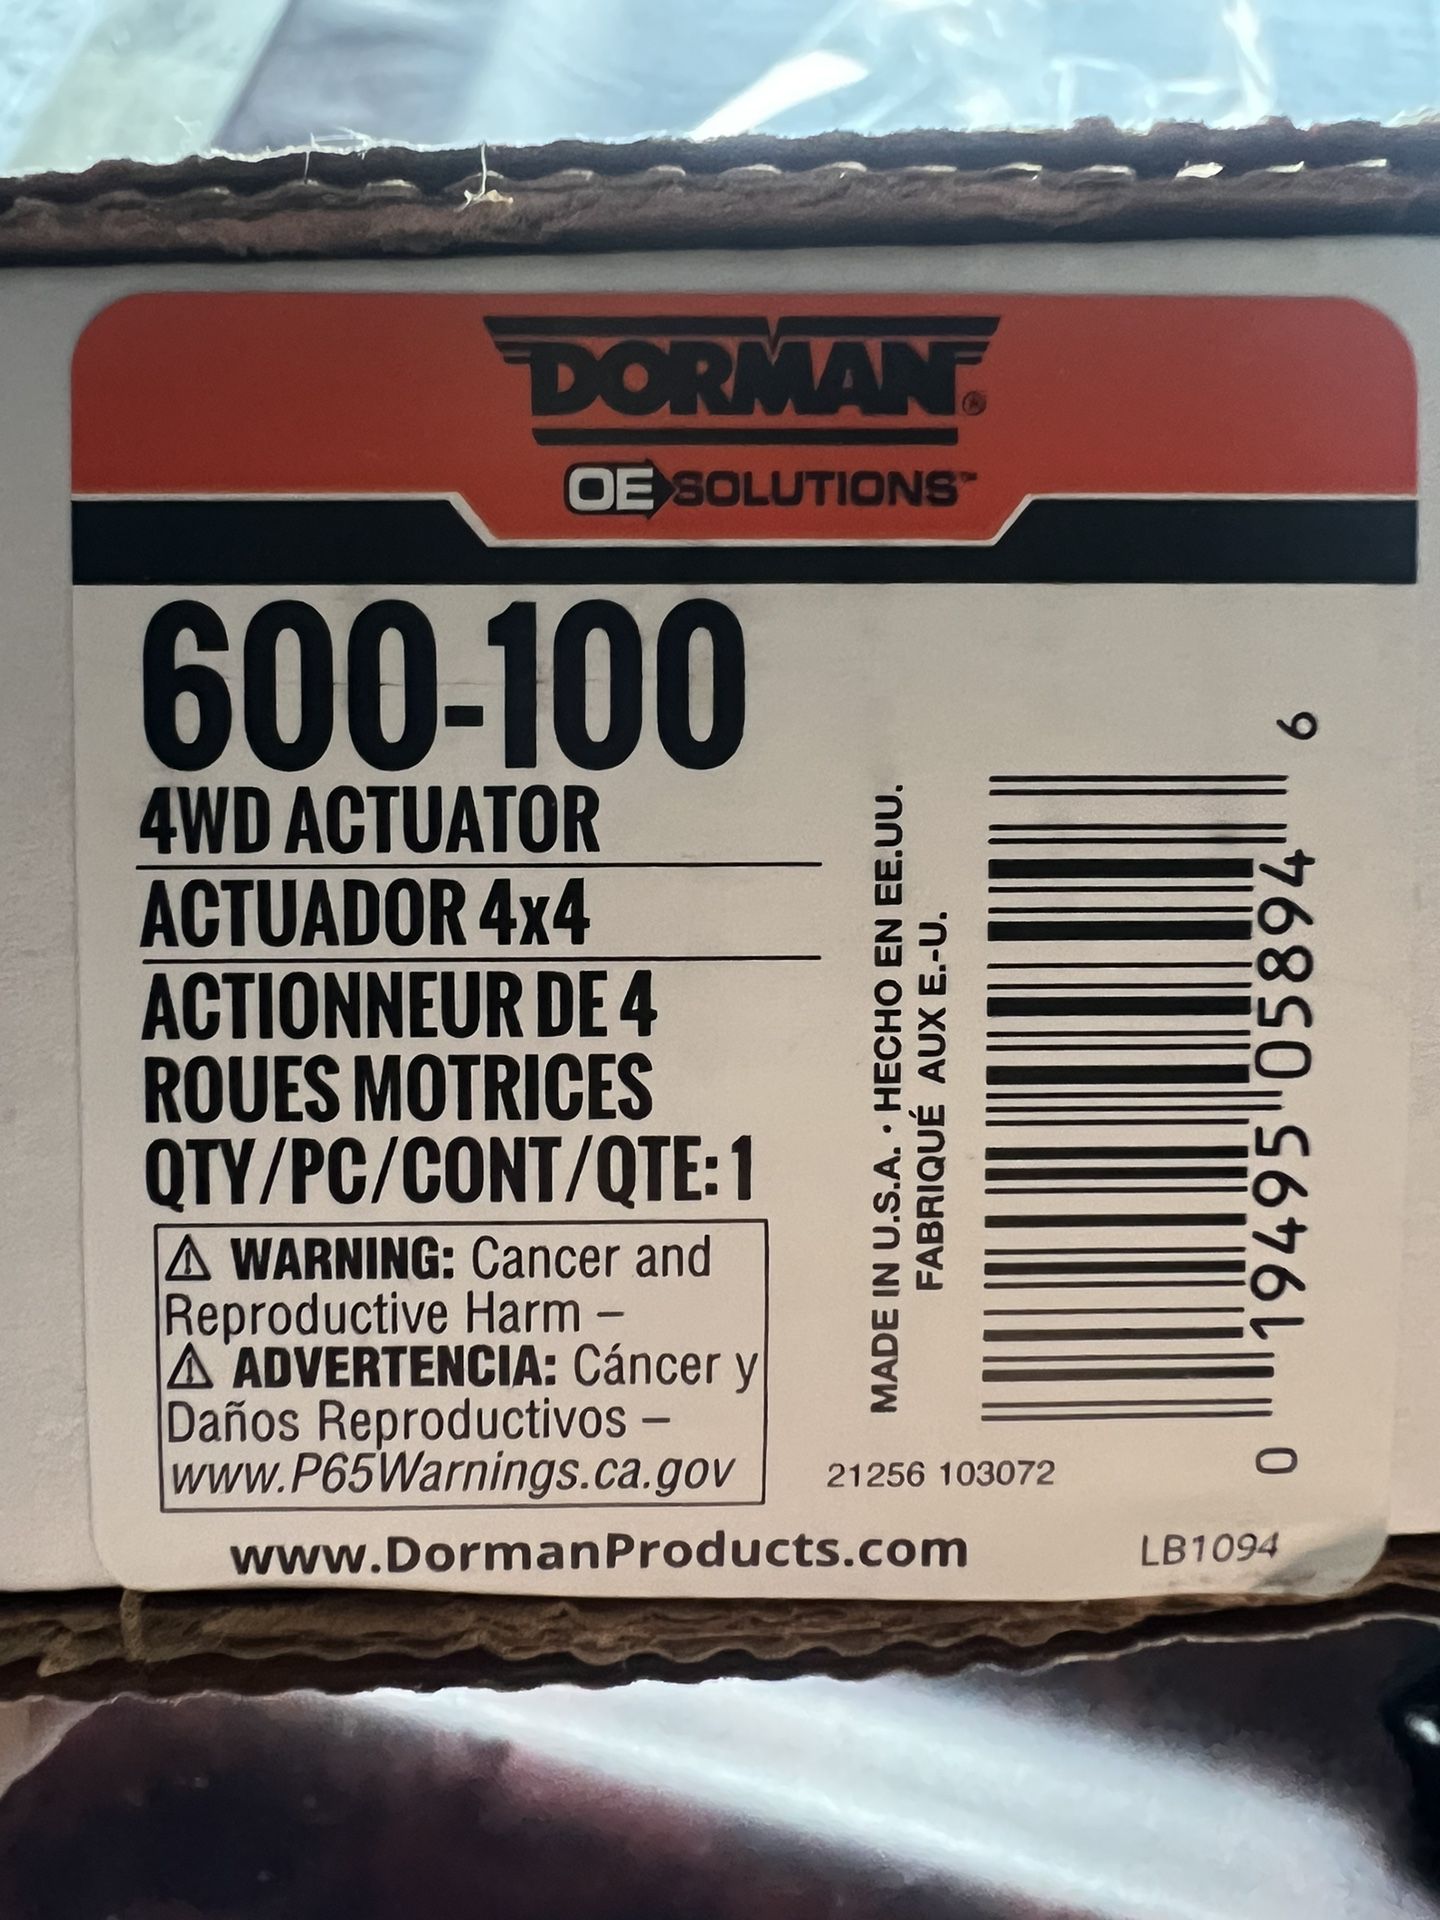 Dorman 4wd Actuator NEW for Sale in City Of Industry, CA OfferUp